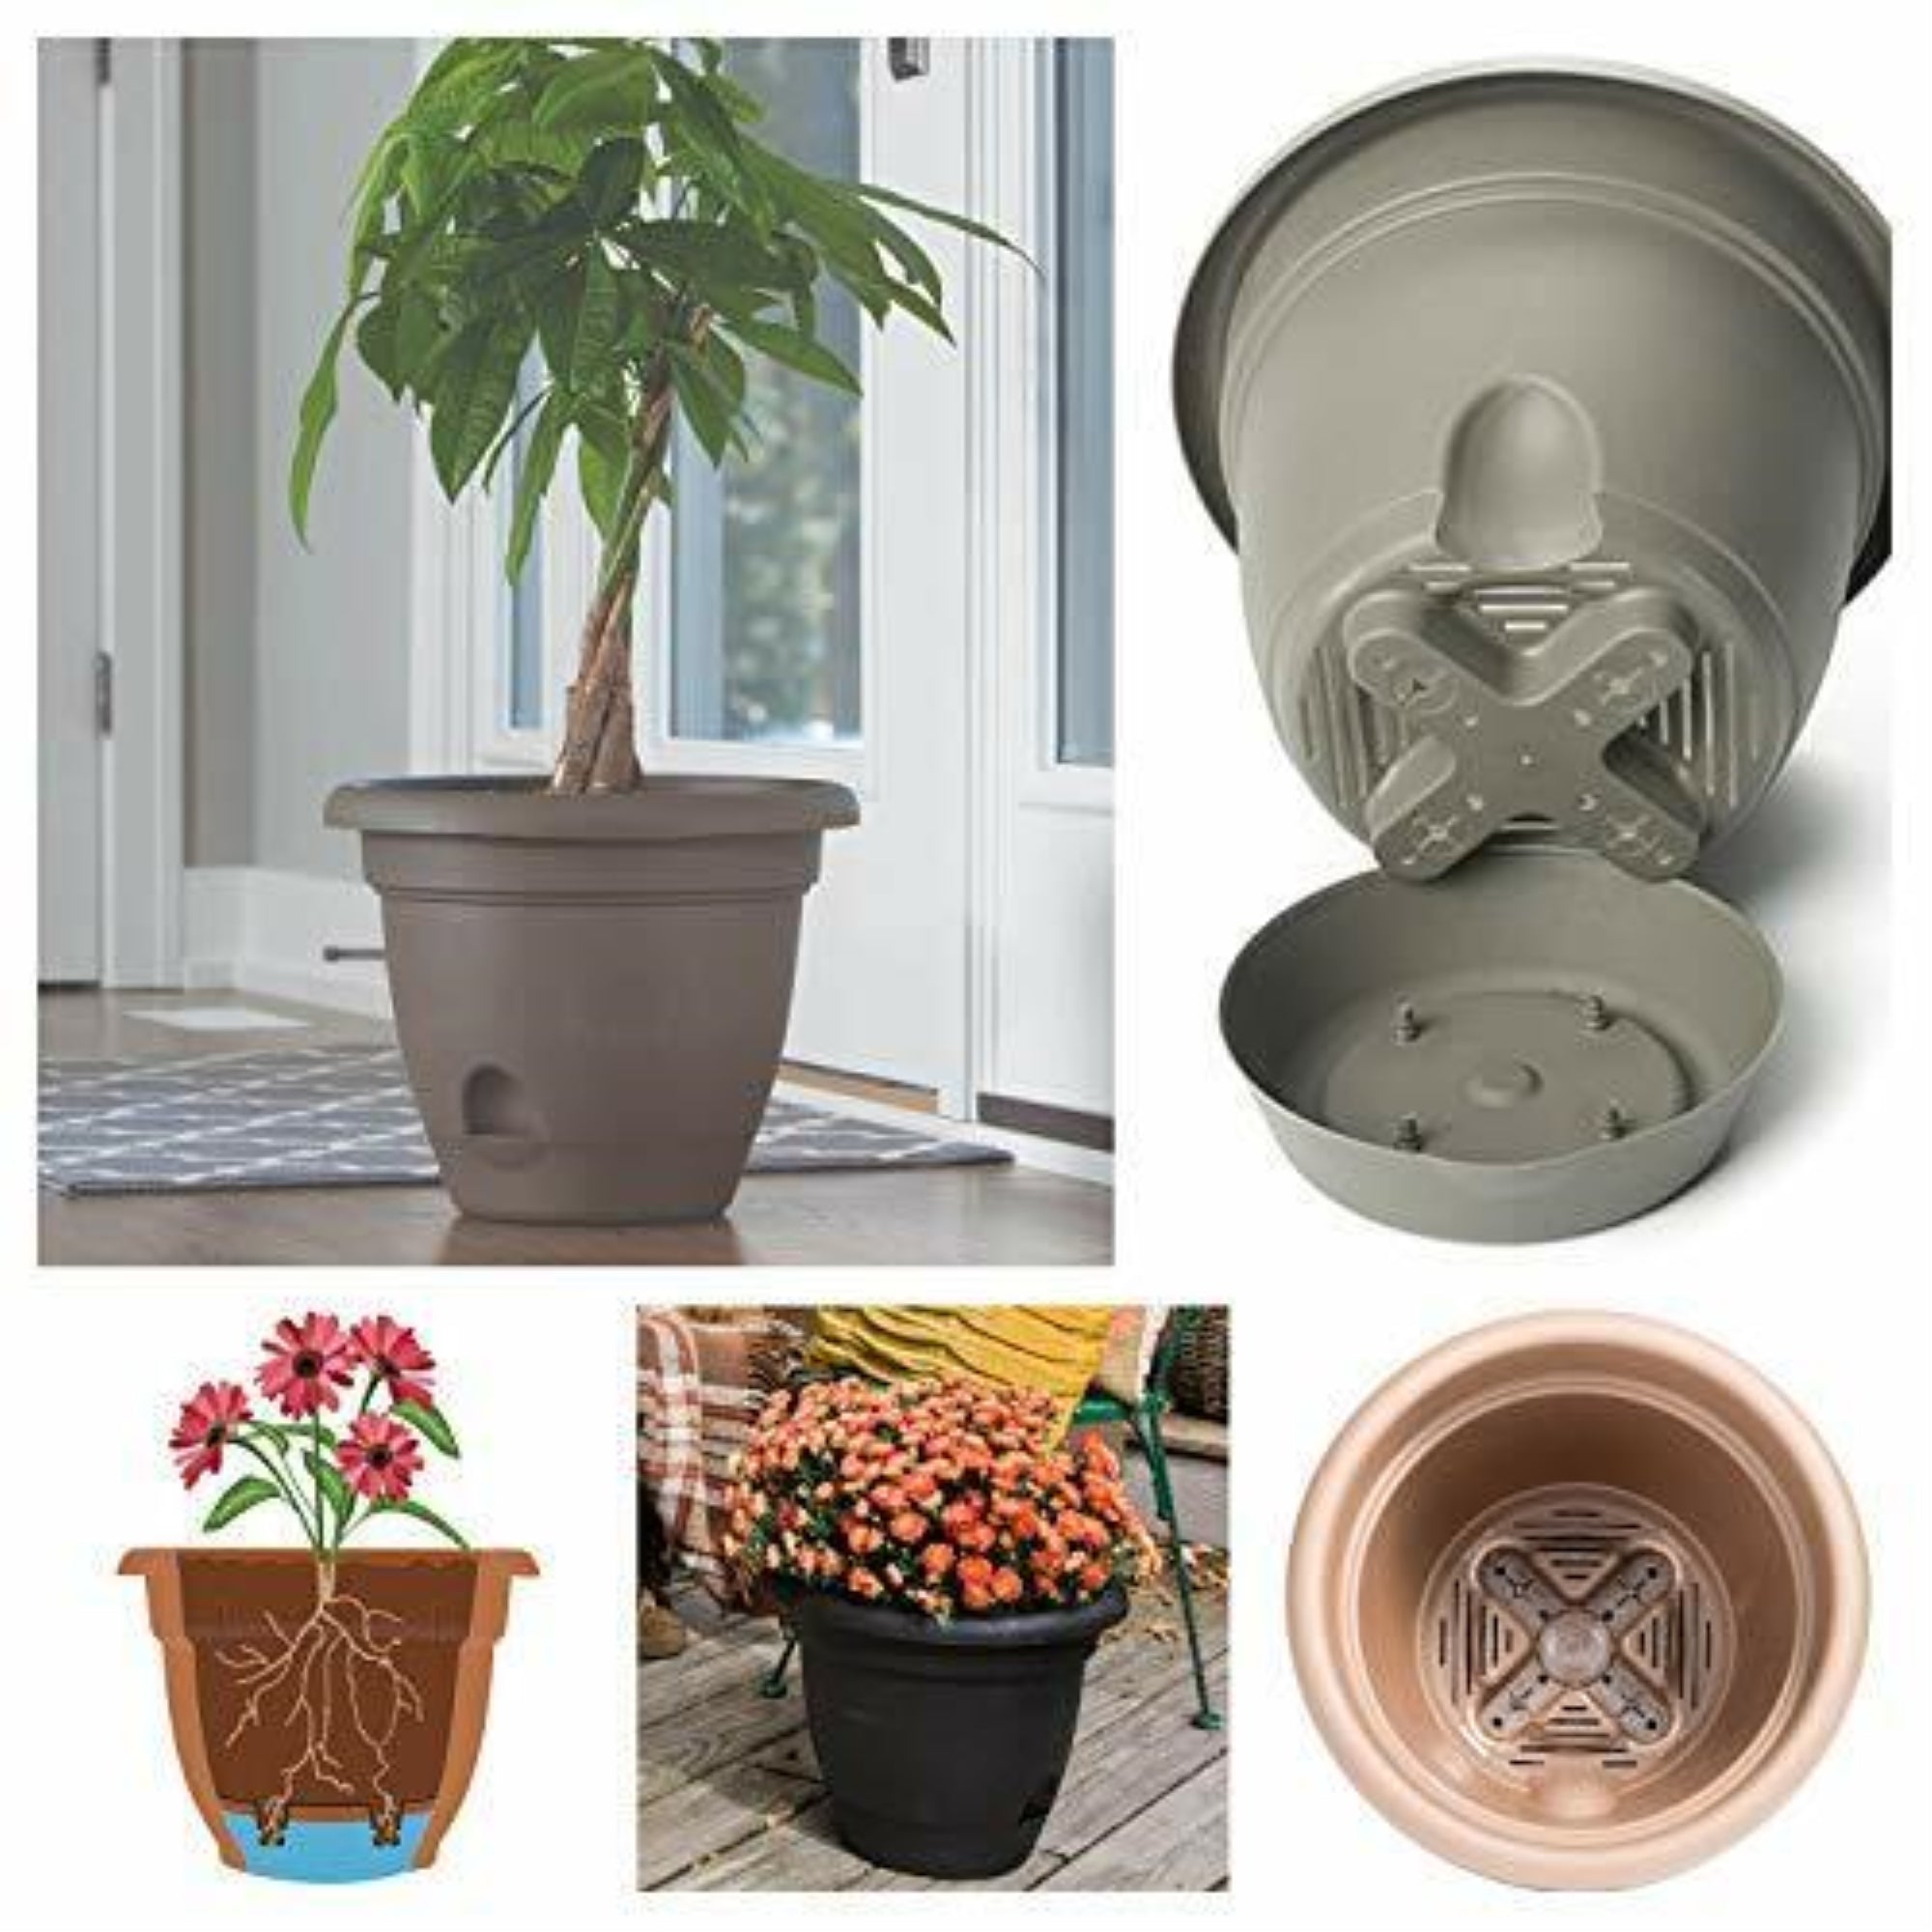 Bloem Lucca Plastic Self-Watering Planter With Easy Access Watering Spout